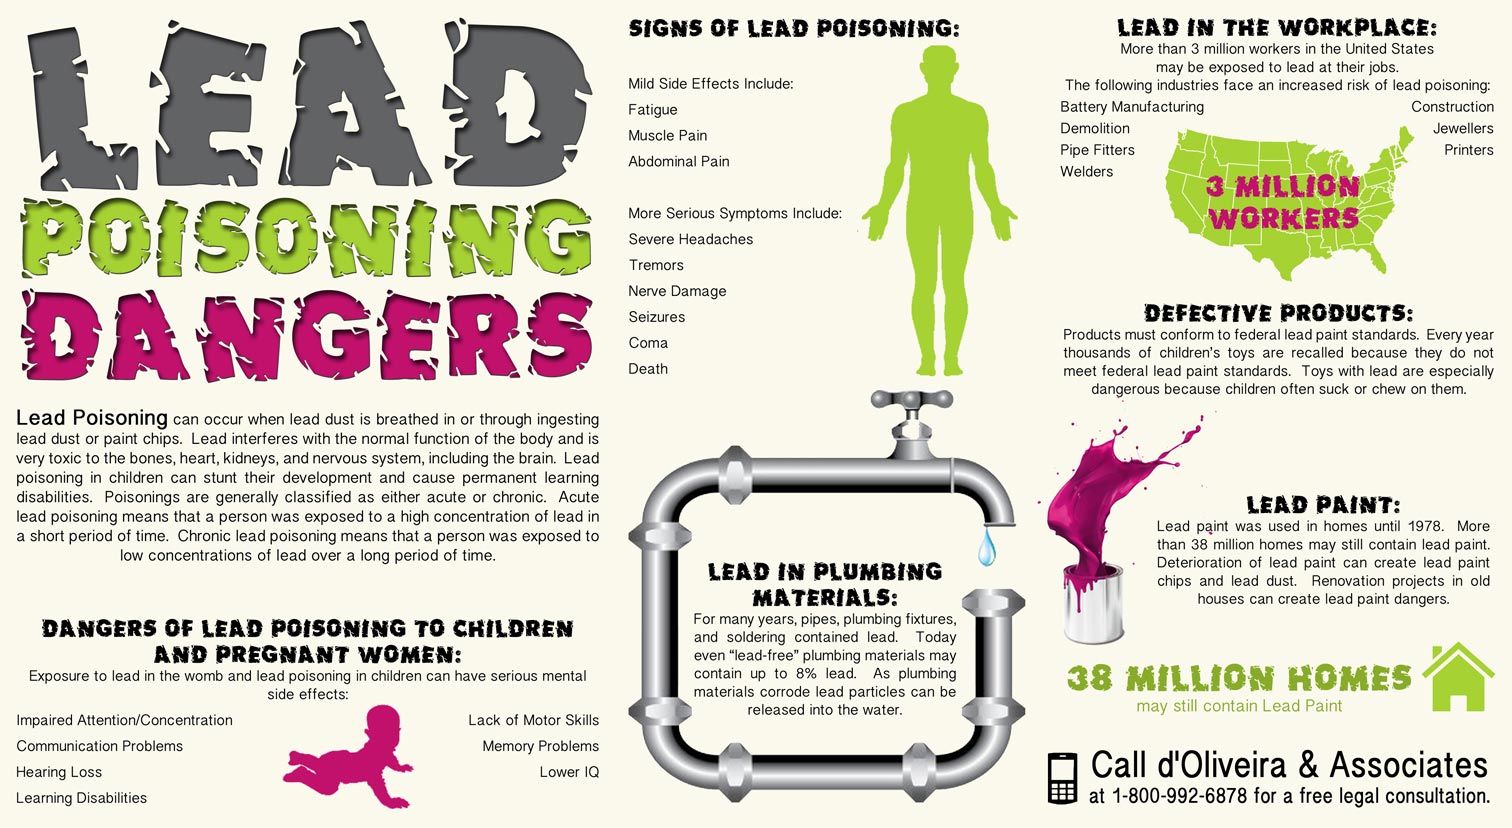 Lead over. Lead poisoning. Lead poisoning Antidote. Lead poisoning stare. Lead poisoning Labs.